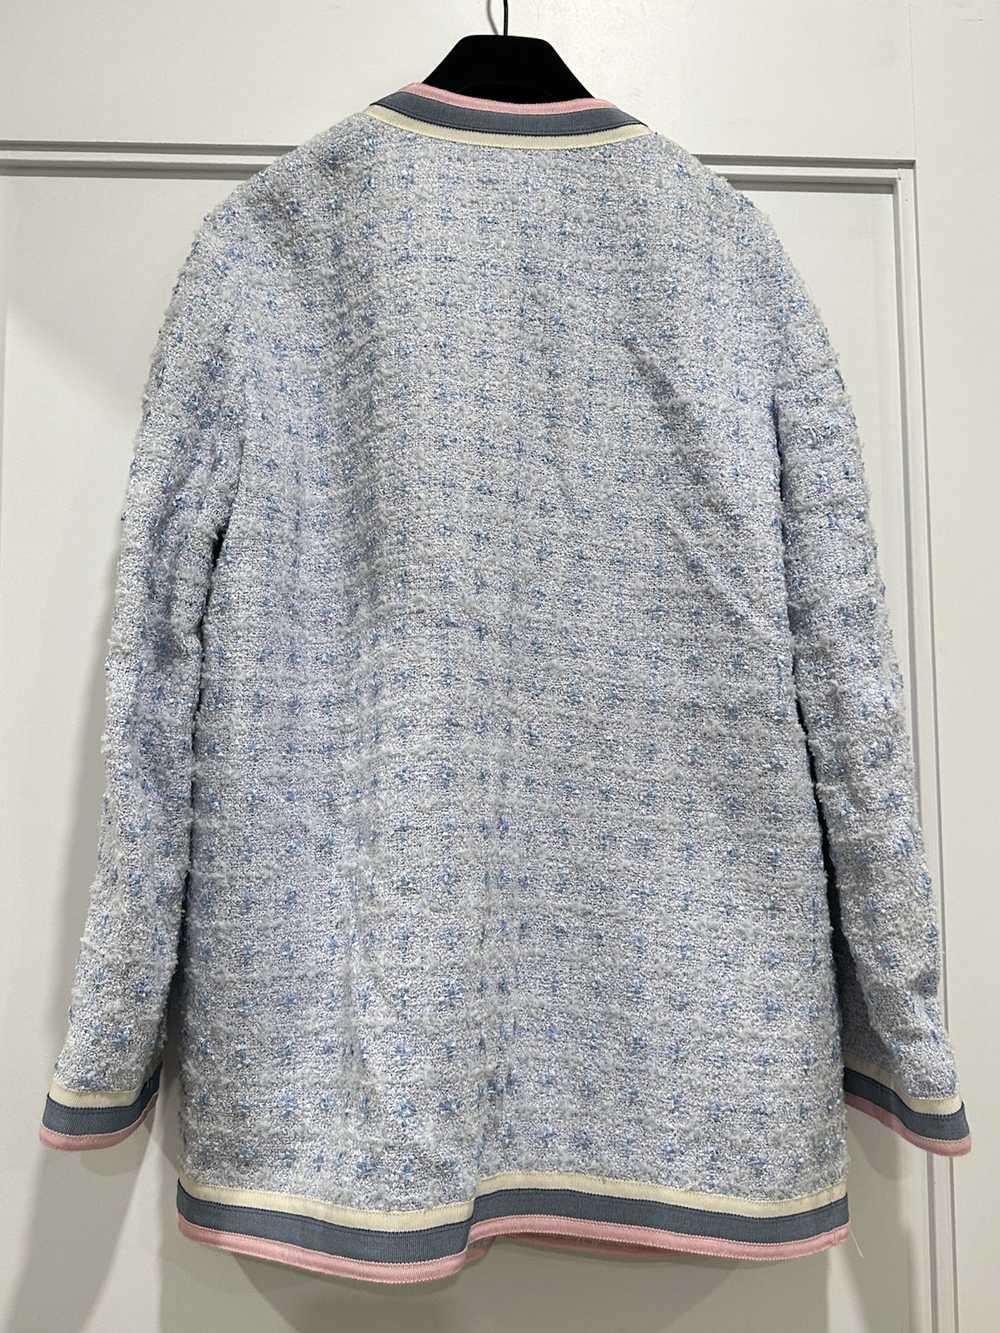 Gucci Gucci Tweed Jacket in Light Blue - image 2